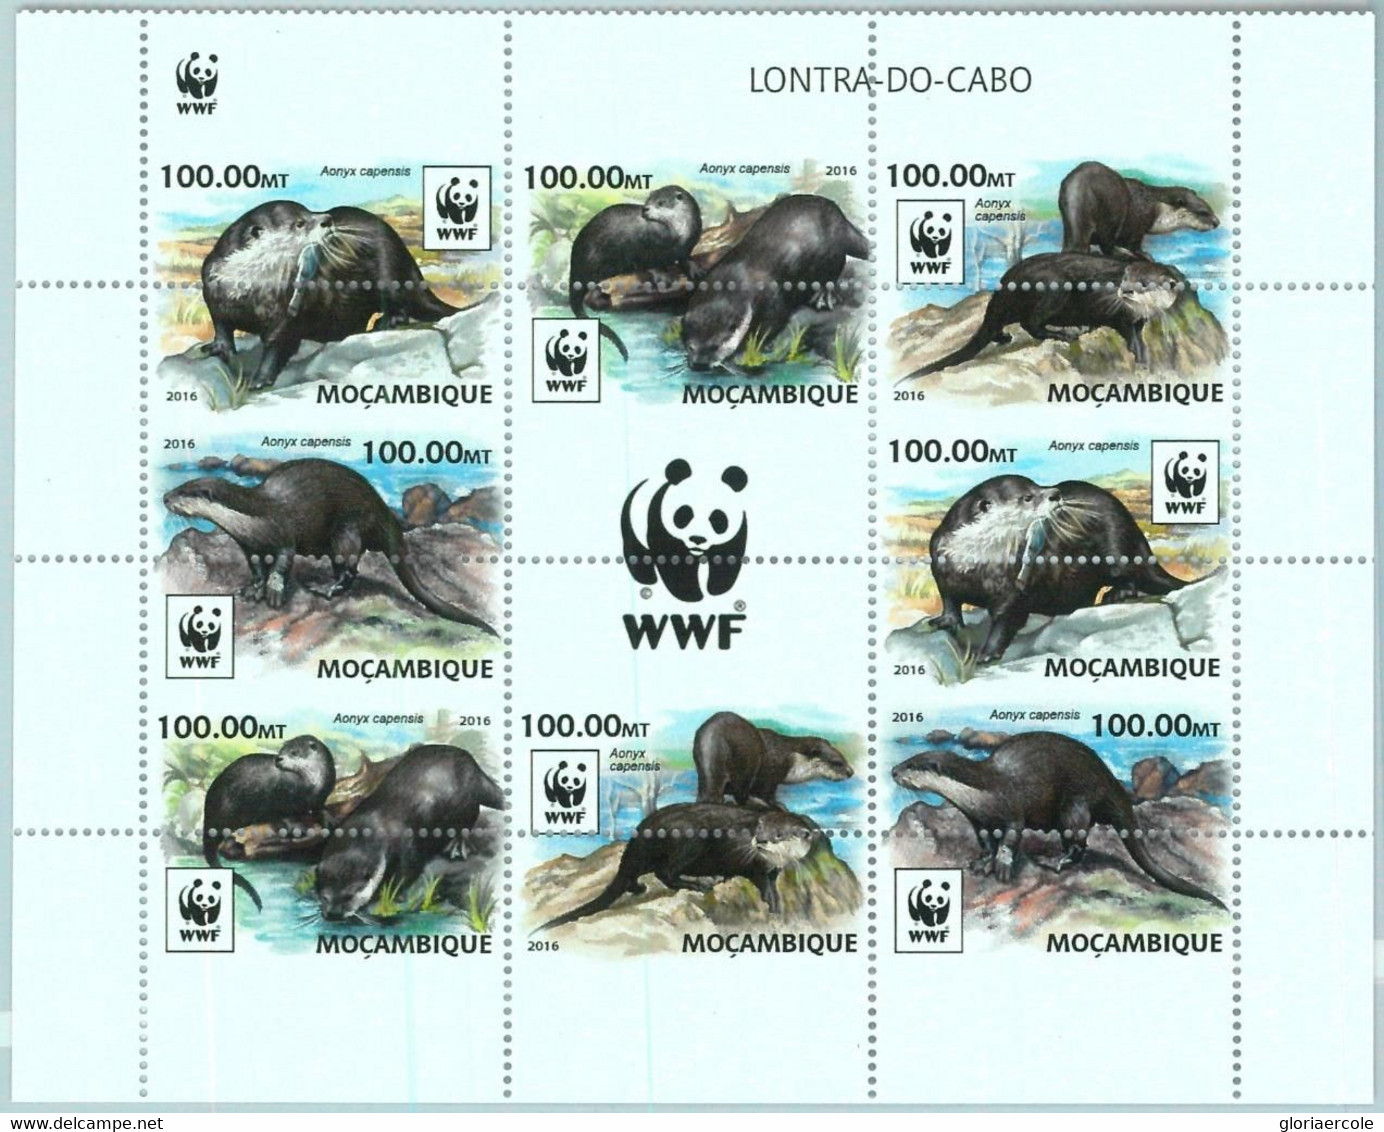 A1342 - MOZAMBIQUE, ERROR, MISPERF, Miniature Sheet: 2016, Otters, Fauna, WWF  R04.22 - Used Stamps